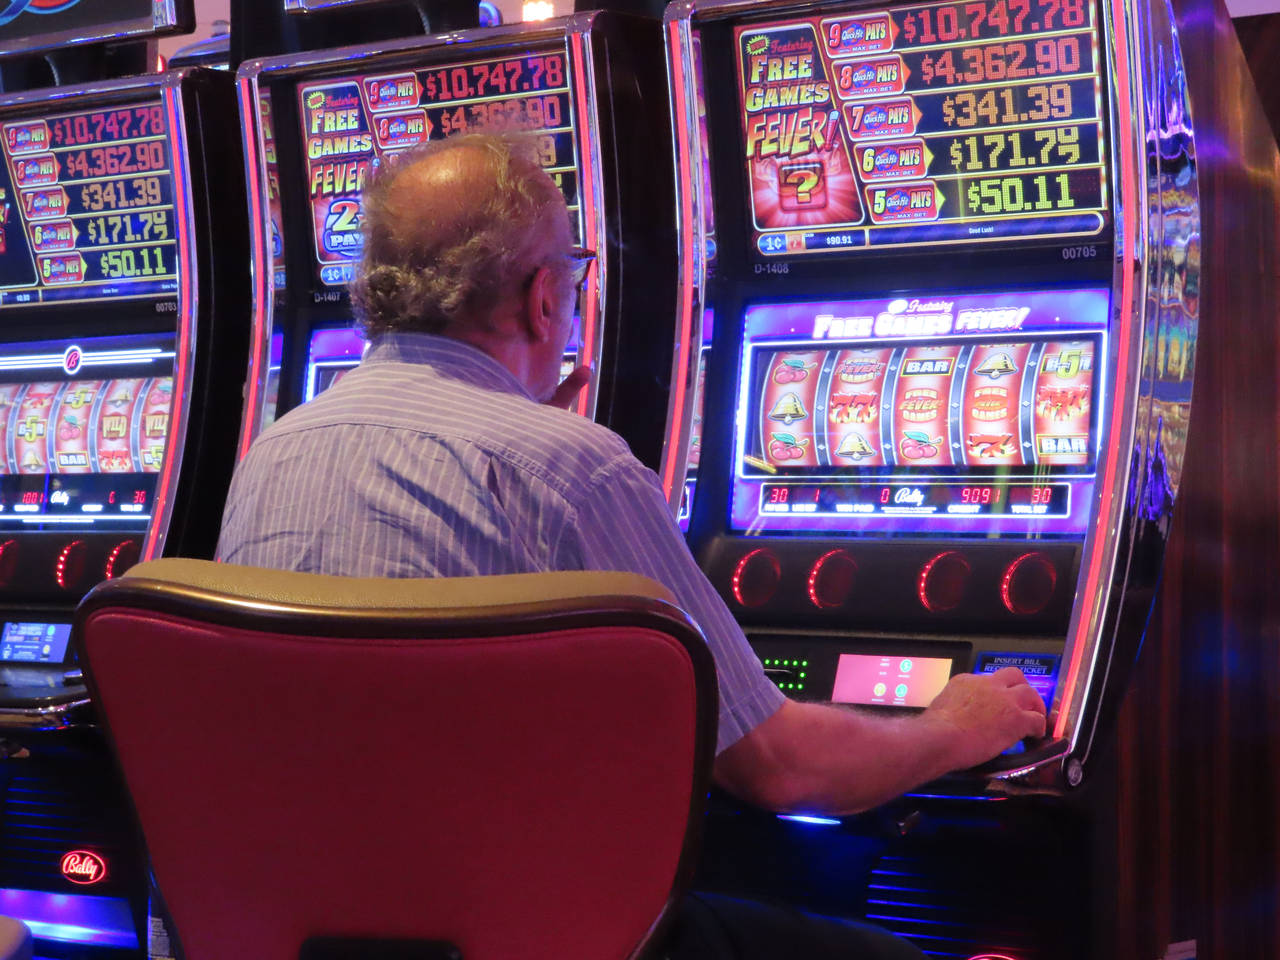 A gambler plays a slot machine at the Hard Rock Casino in Atlantic City, N.J., on Aug. 8, 2022. Fig...